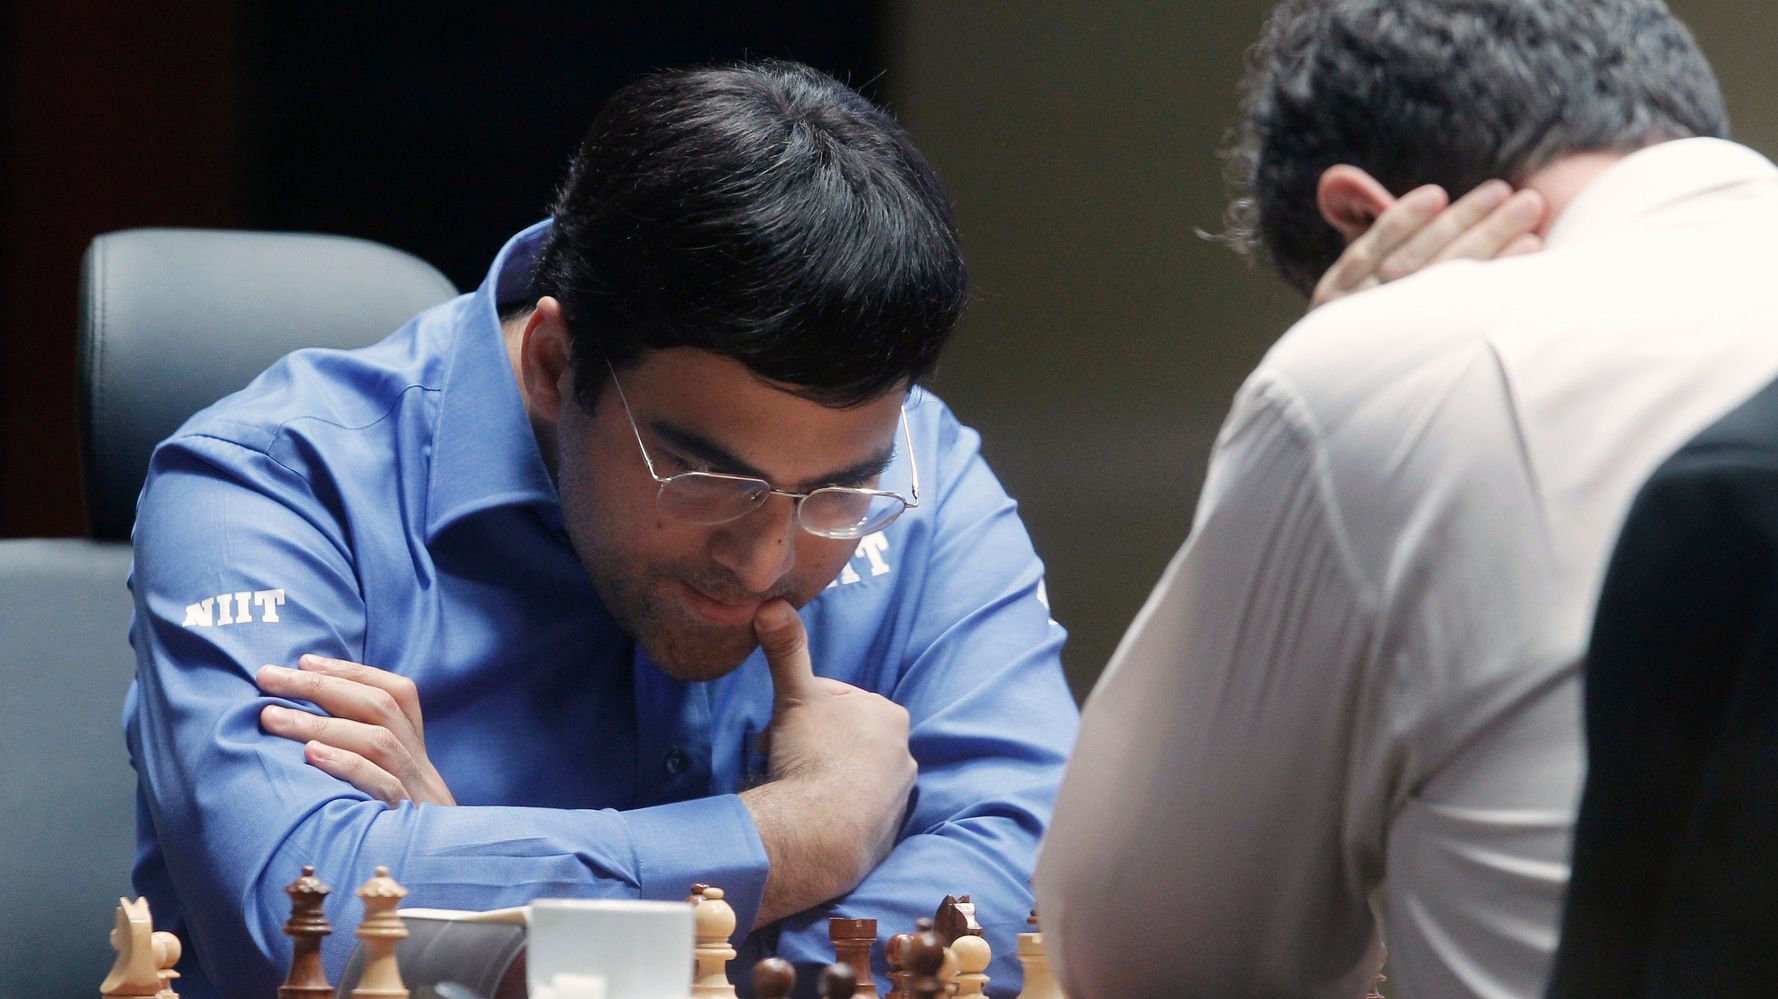 A planet named after chess pro Viswanathan Anand and other